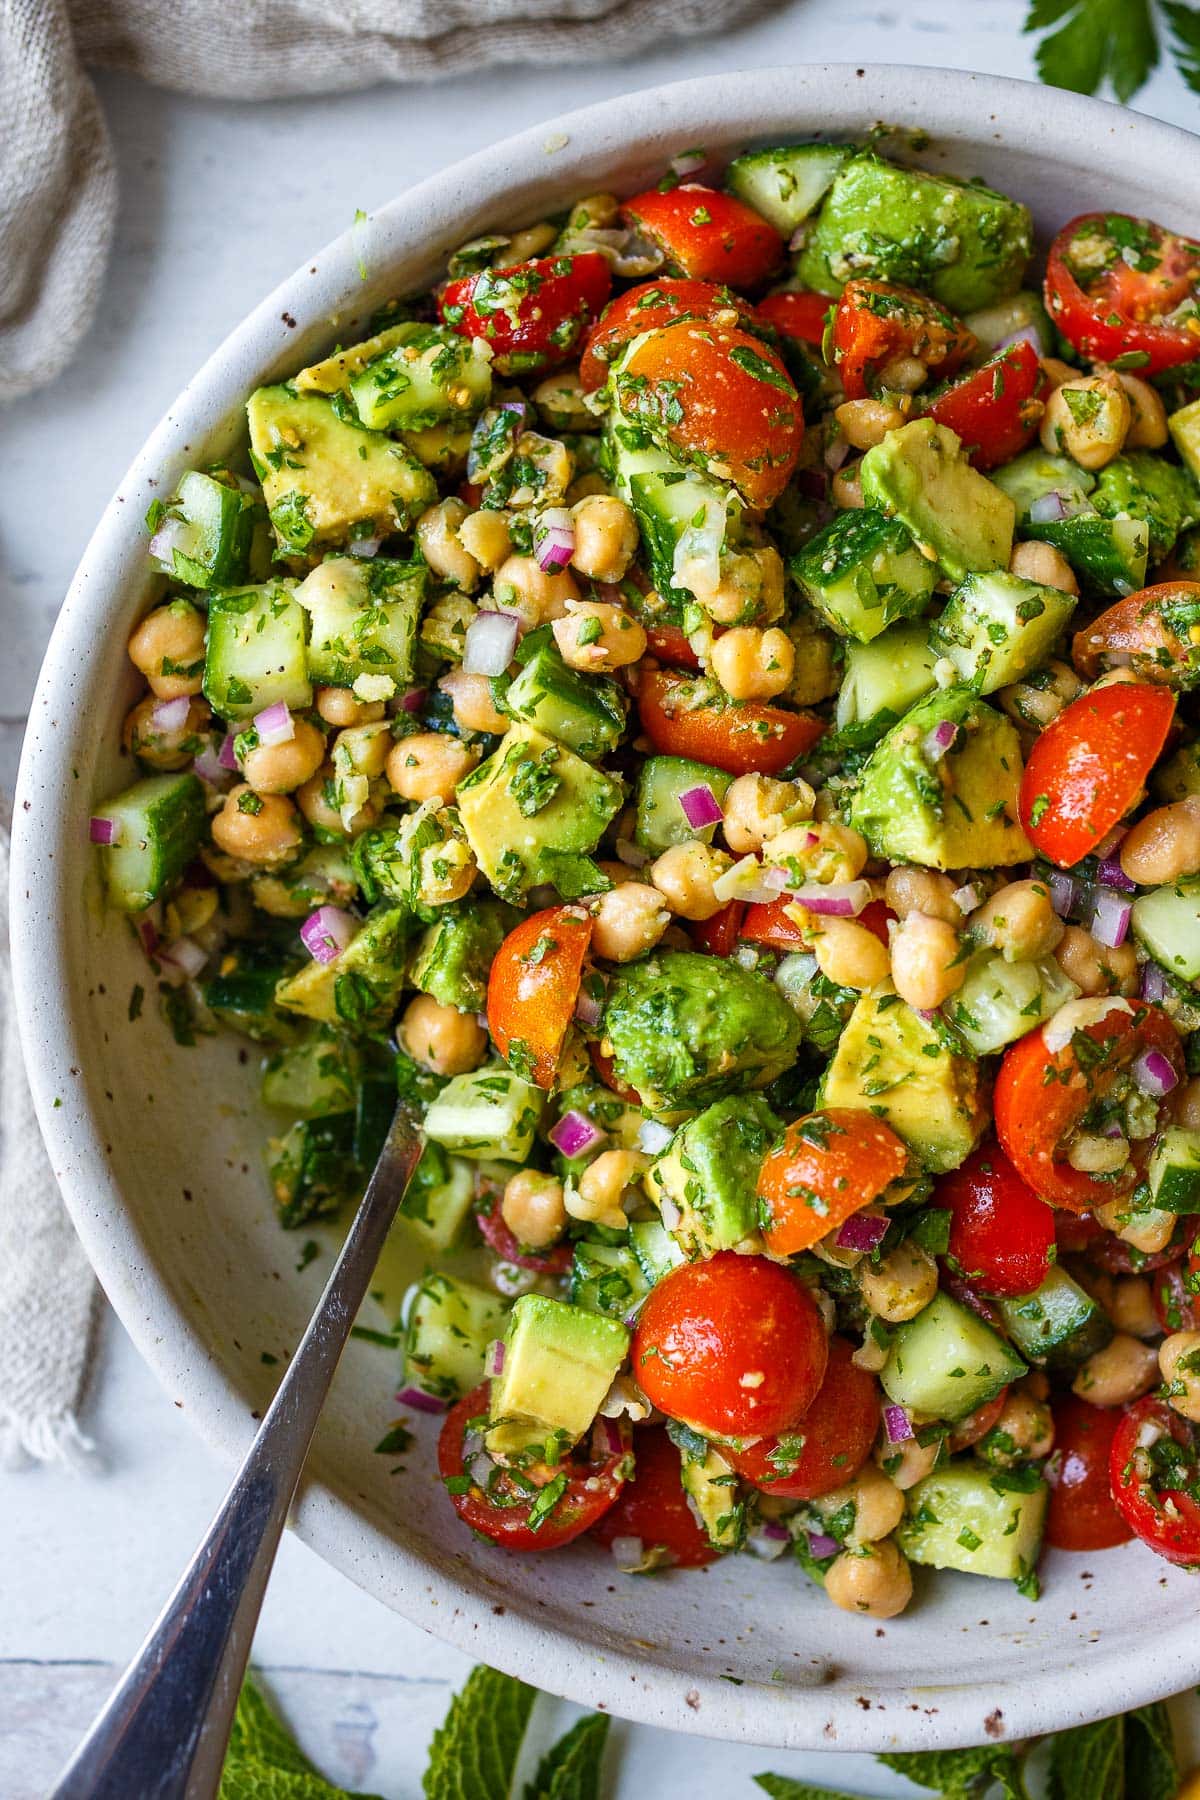 This Chickpea Salad is quick, easy and full of fresh flavors and crunchy texture. Made in one bowl with a simple lemon olive oil dressing, everything comes together in about 20 minutes!